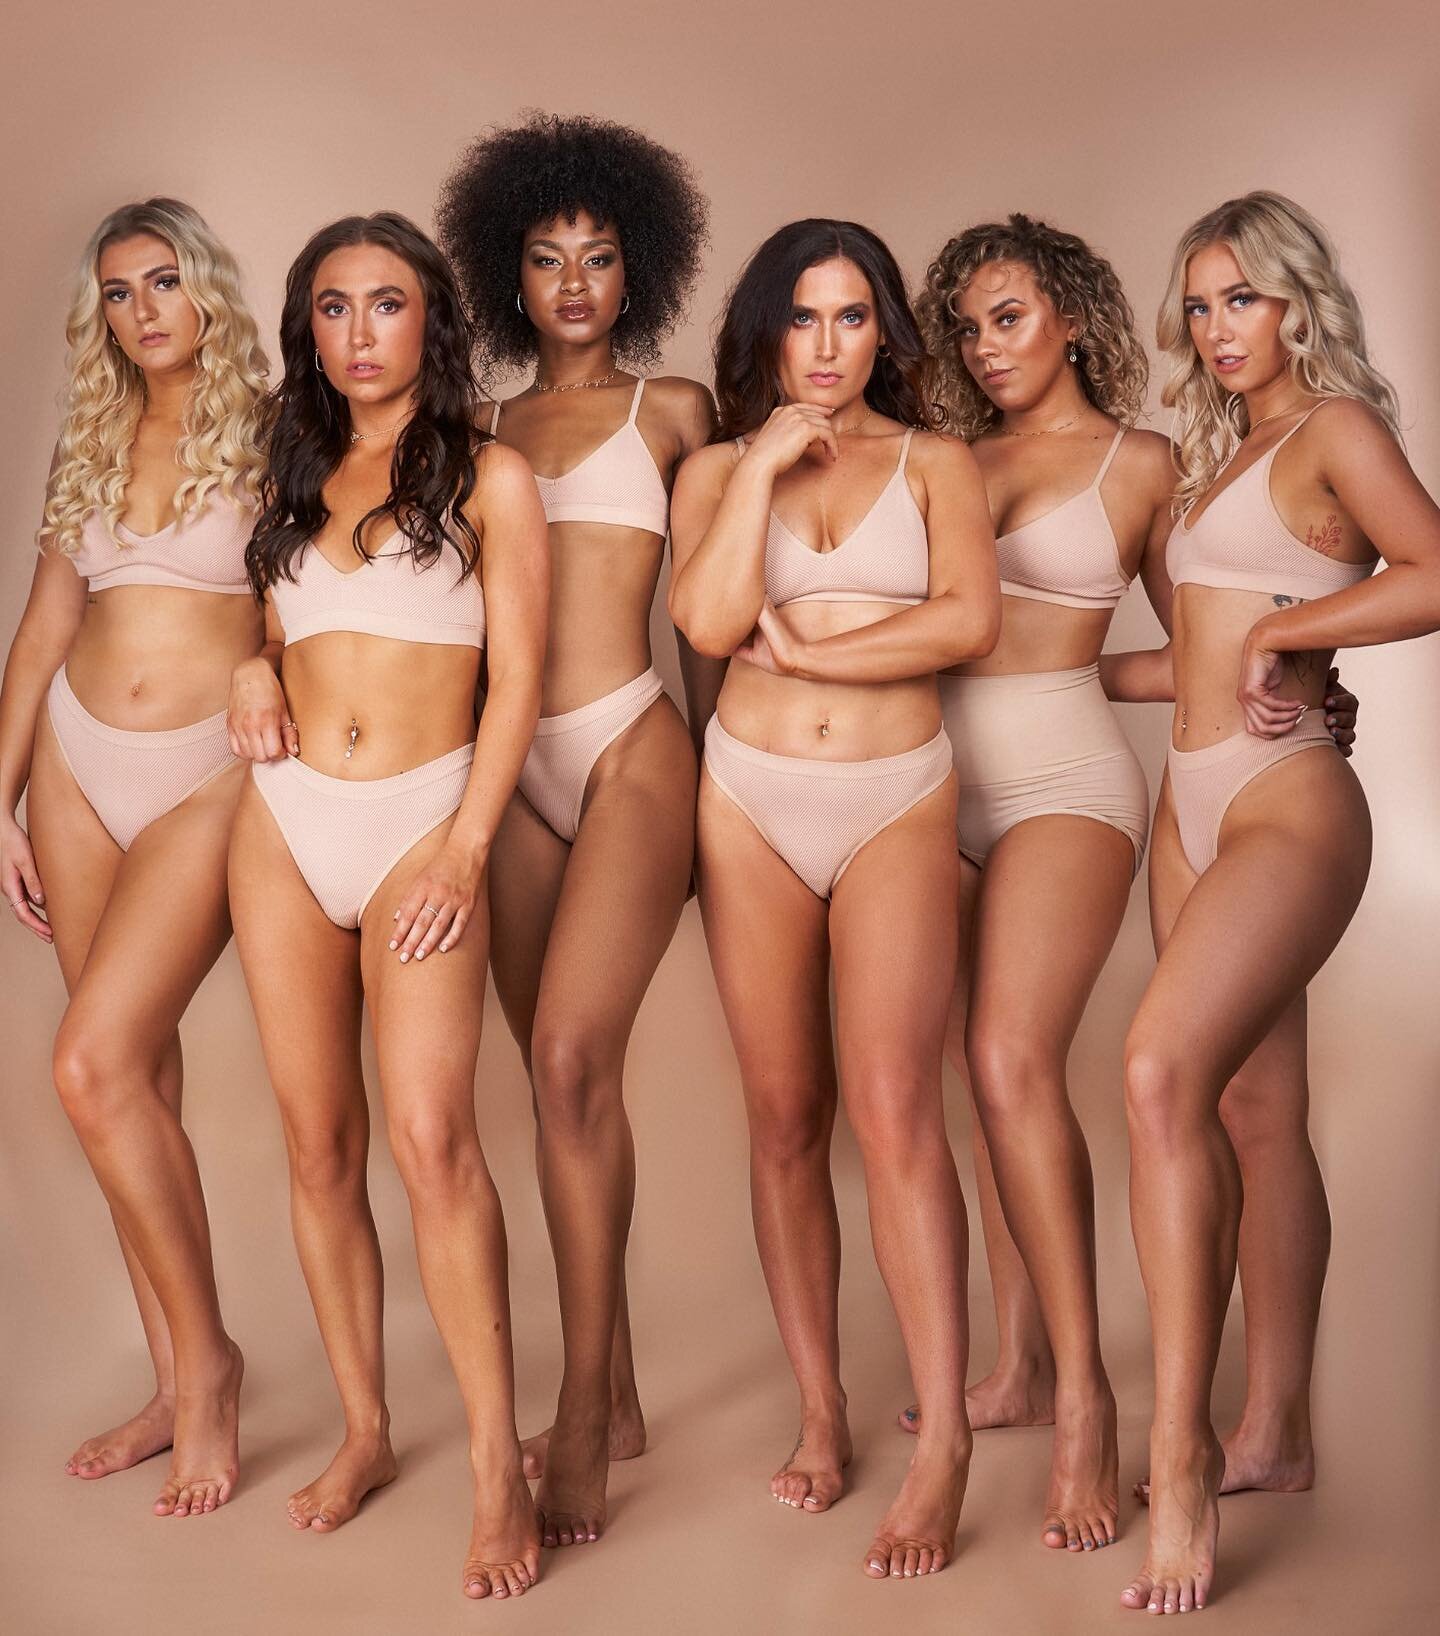 UNIQUE BEAUTIES 😍 @sbstudios.co for @twicethebeautyx

📸 @shotbysarahlou - &ldquo;Confidence is the most beautiful thing a woman can wear ✨ a few shots from a recent shoot celebrating every woman&rsquo;s unique beauty 💗&rdquo;

Beauties
@shanremii 